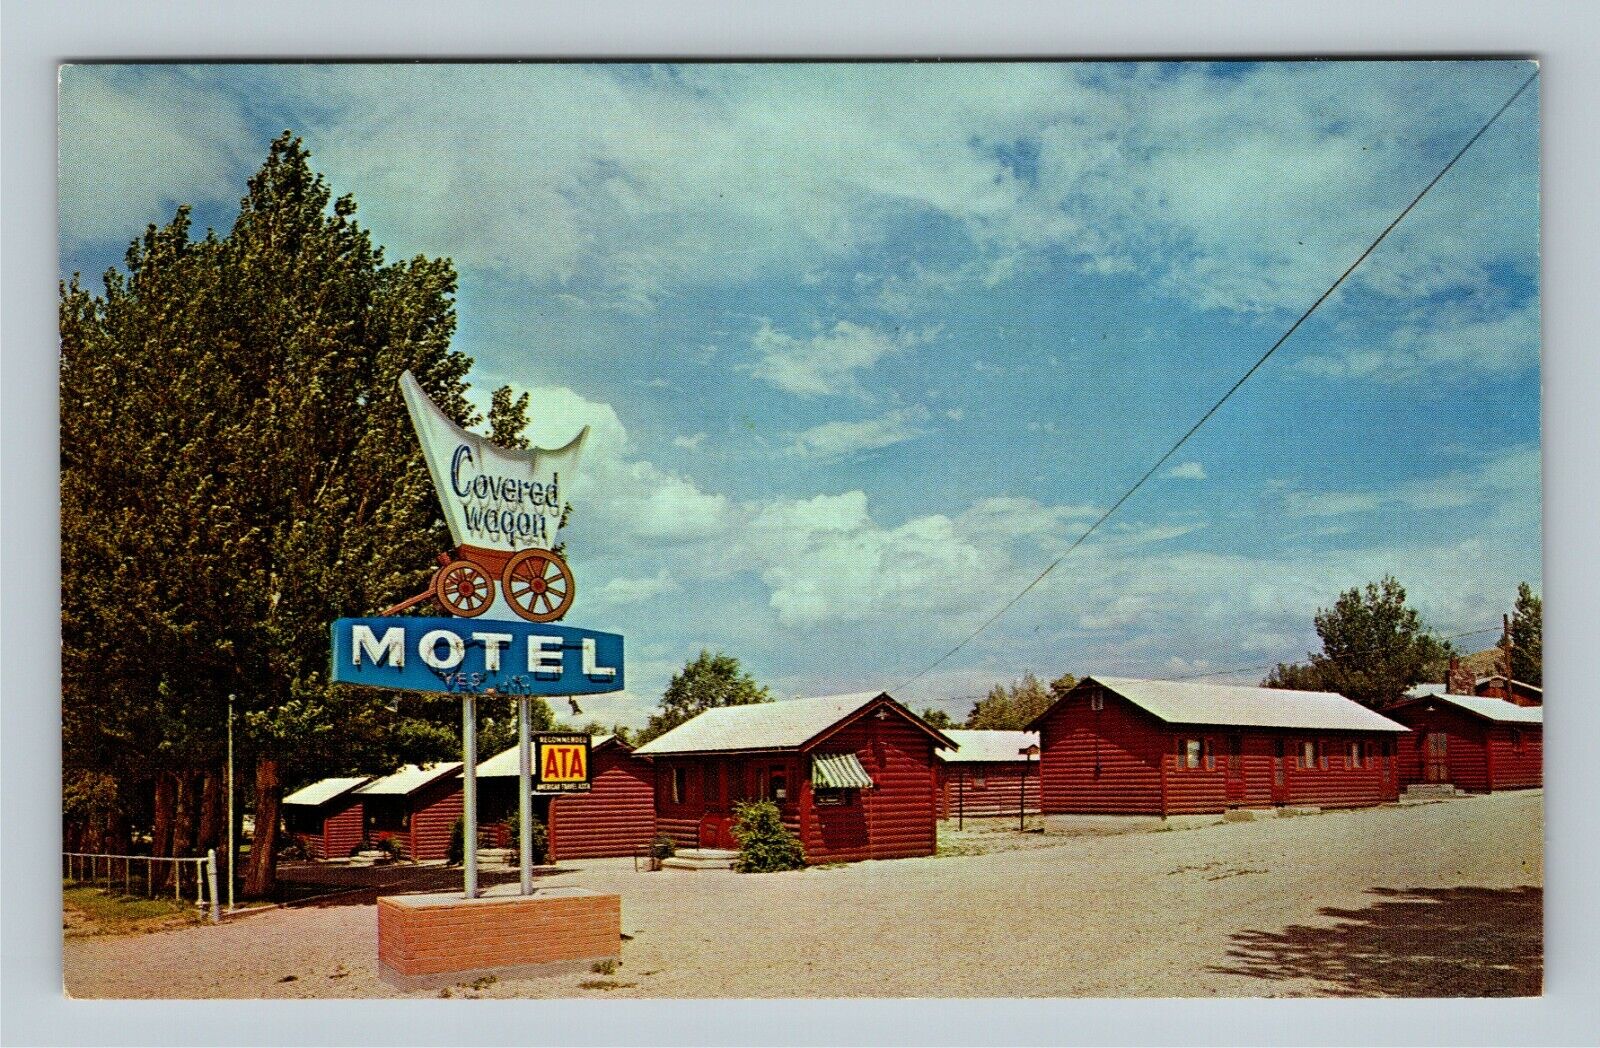 West Cady WY, Covered Wagon Motel Log Cabins Street View Chrome Wyoming Postcard